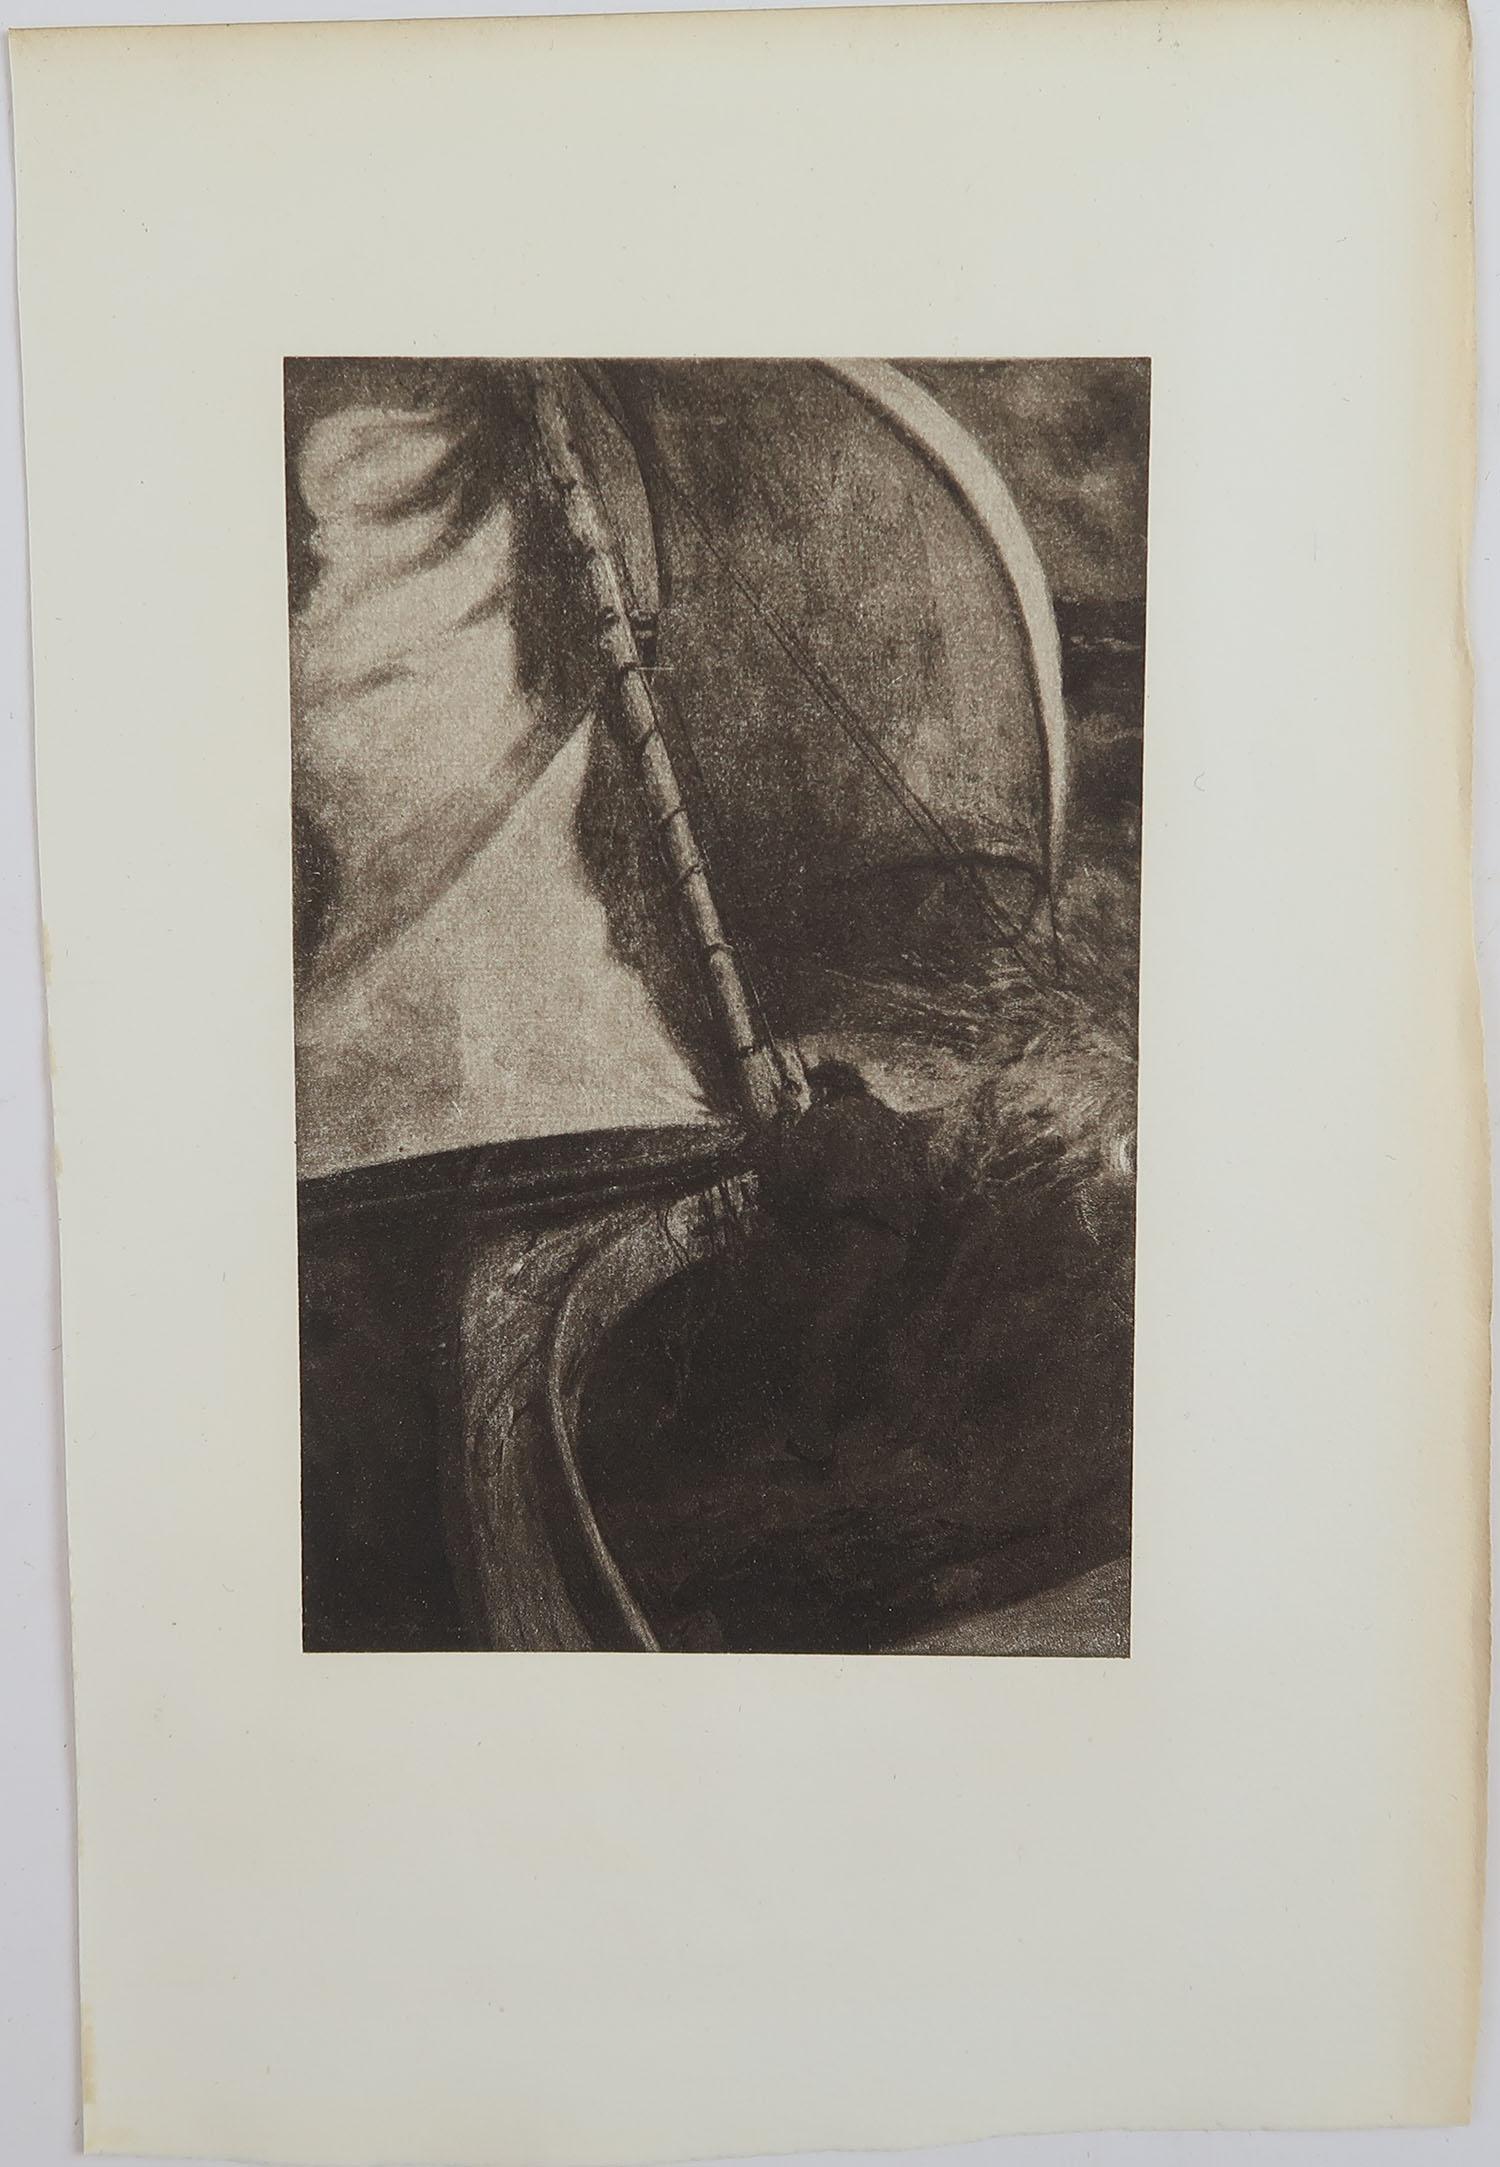 Sensational image by Frederick Simpson Coburn

In the style of one of my favourite artists, Goya

Photogravure

Limited edition of 300. This is No. 84

From The Complete Works of Edgar Allen Poe

Published by Putnam, New York. 1902

On